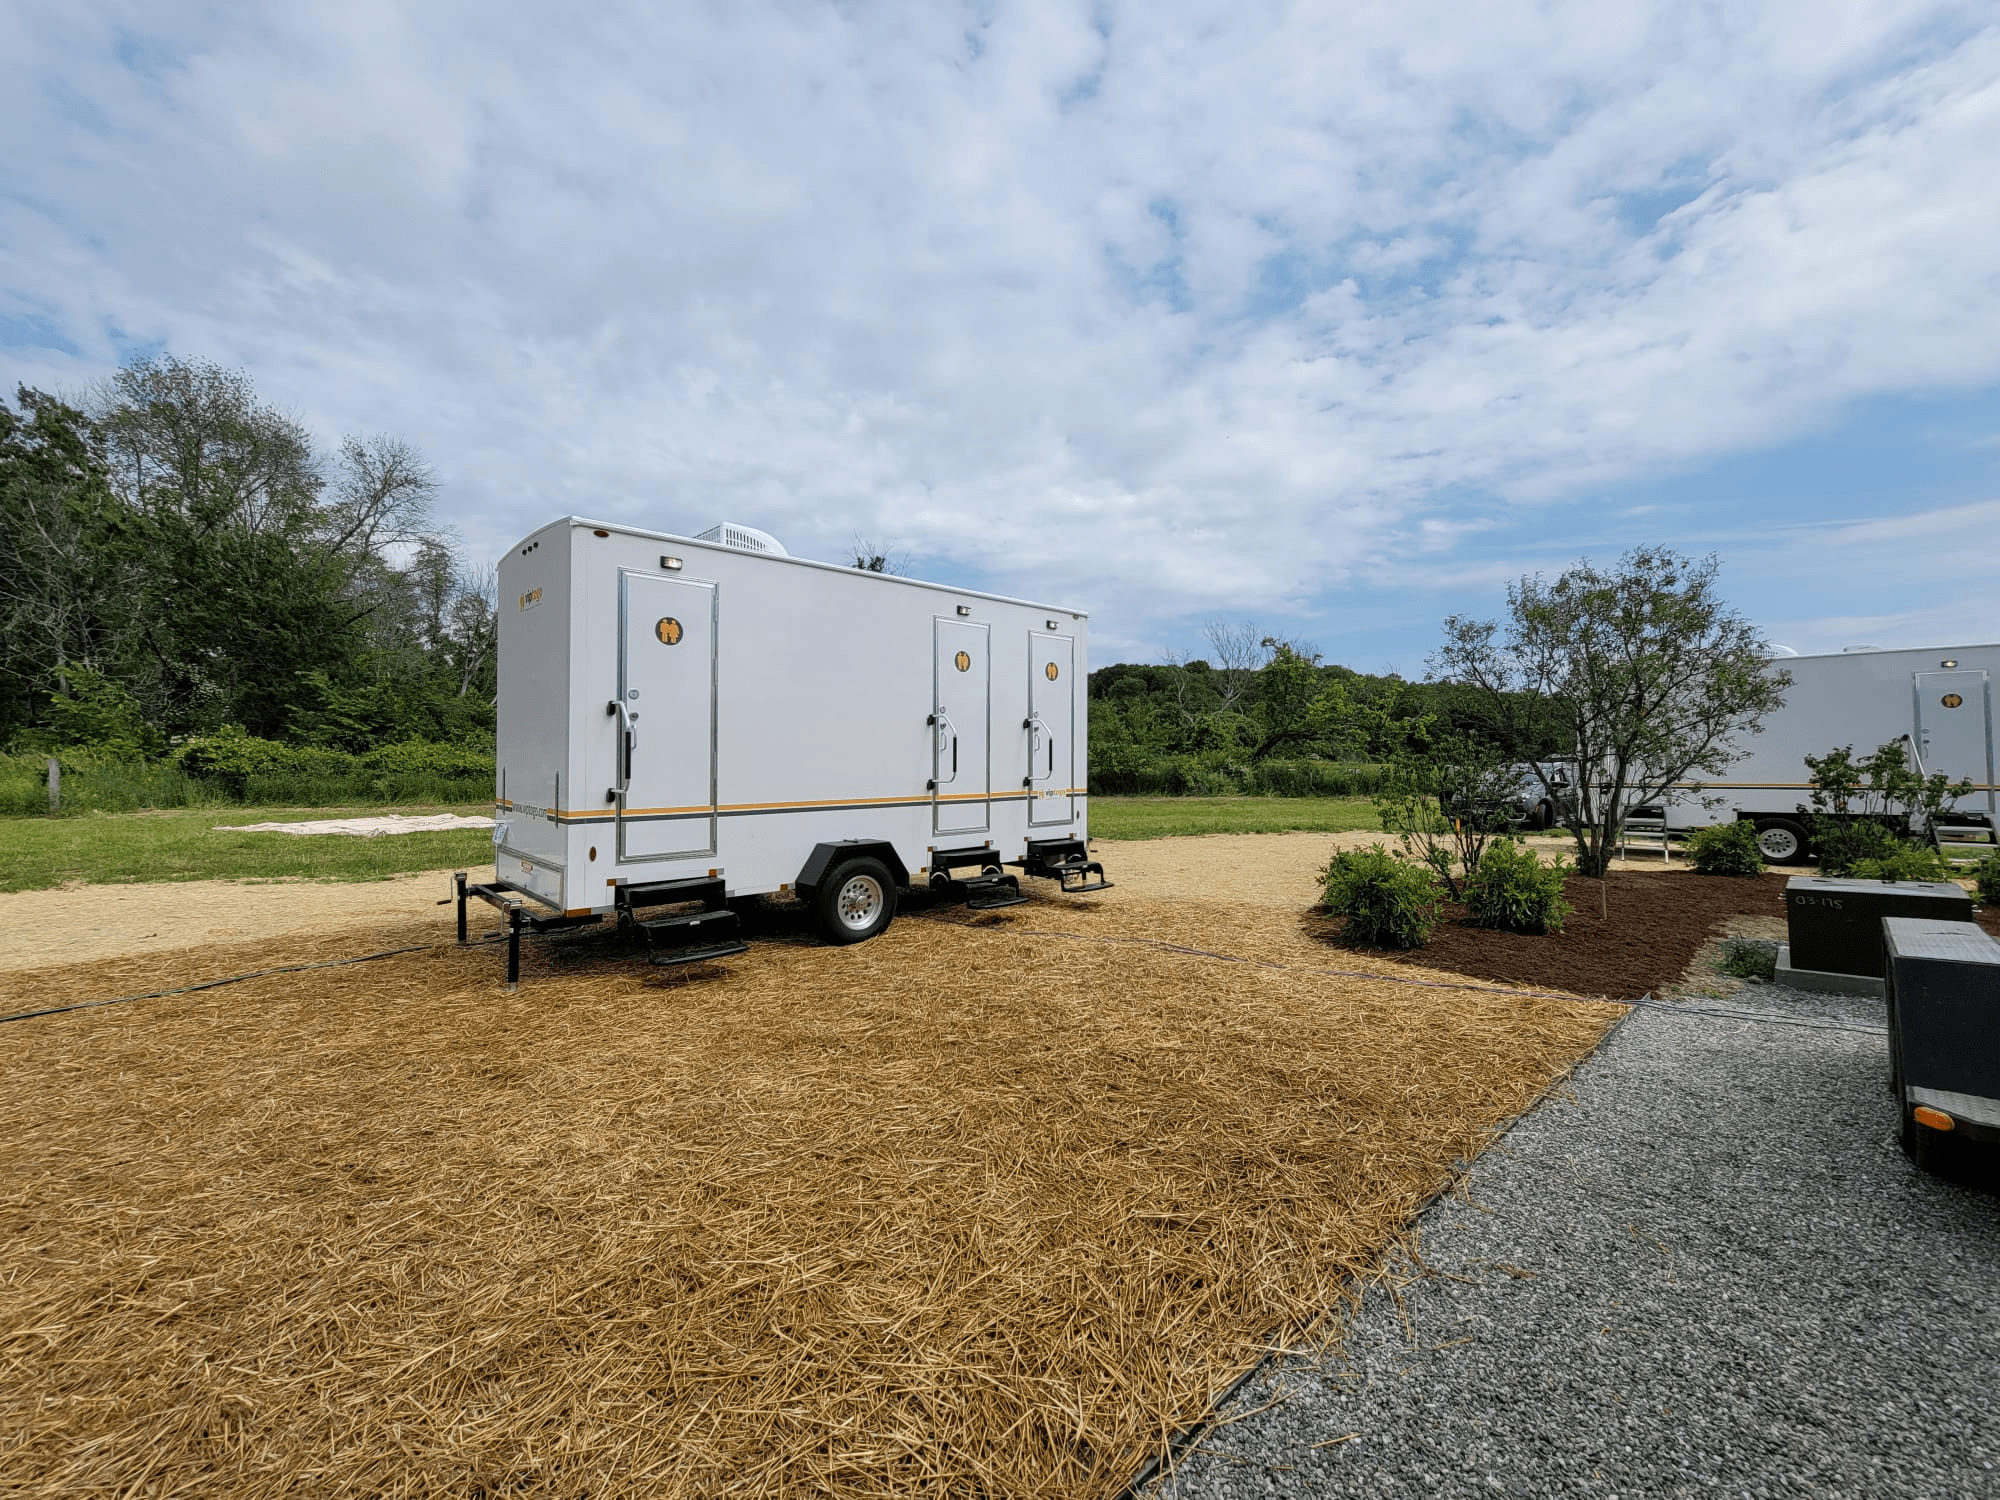 restroom trailers at outdoor camping site